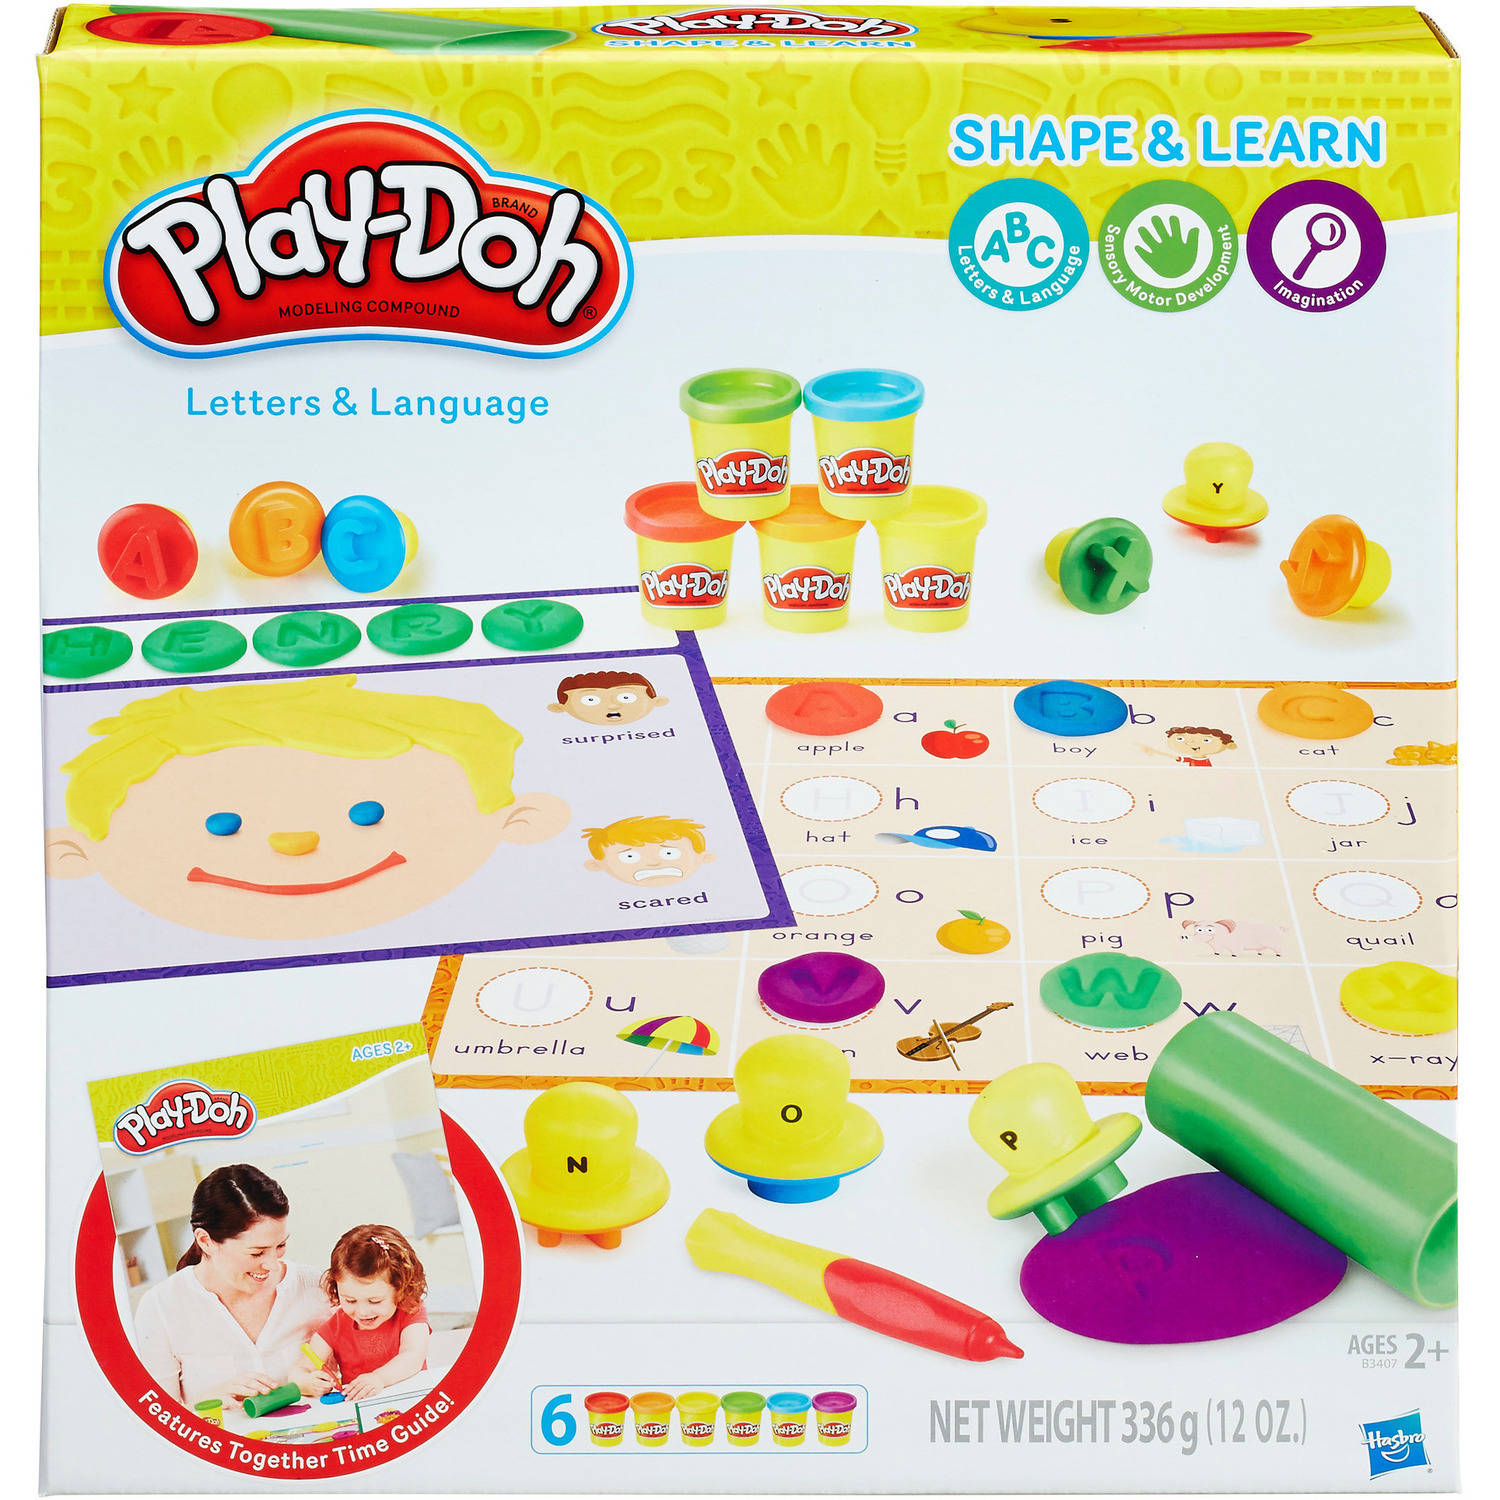 Play-Doh Shape & Learn Letters & Language Set with 6 Cans of Play-Doh & 25+ Tools - image 1 of 2